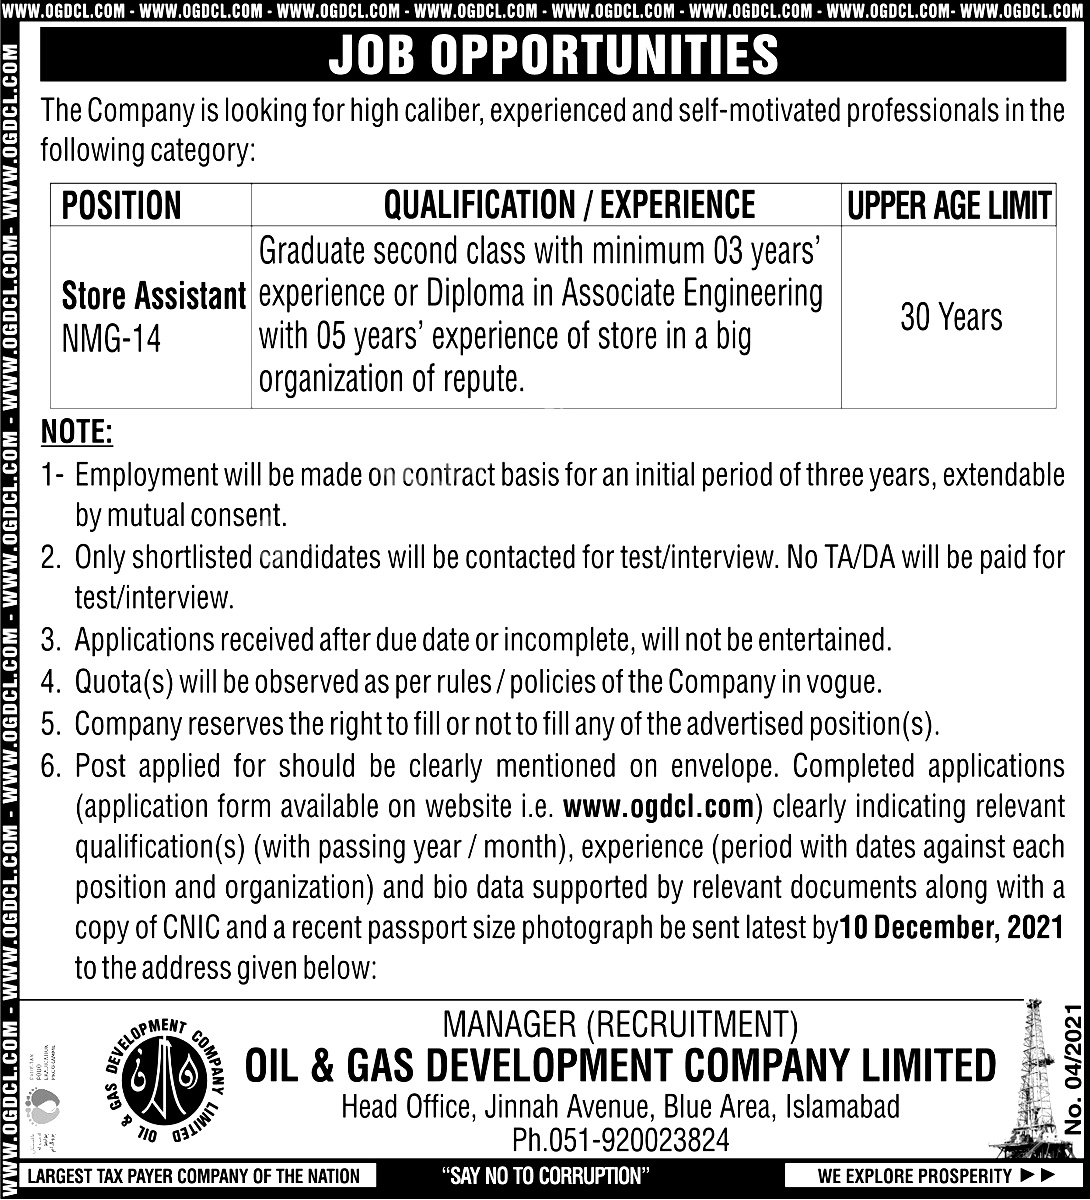 Oil & Gas Development Company Limited OGDCL Islamabad Jobs 2021